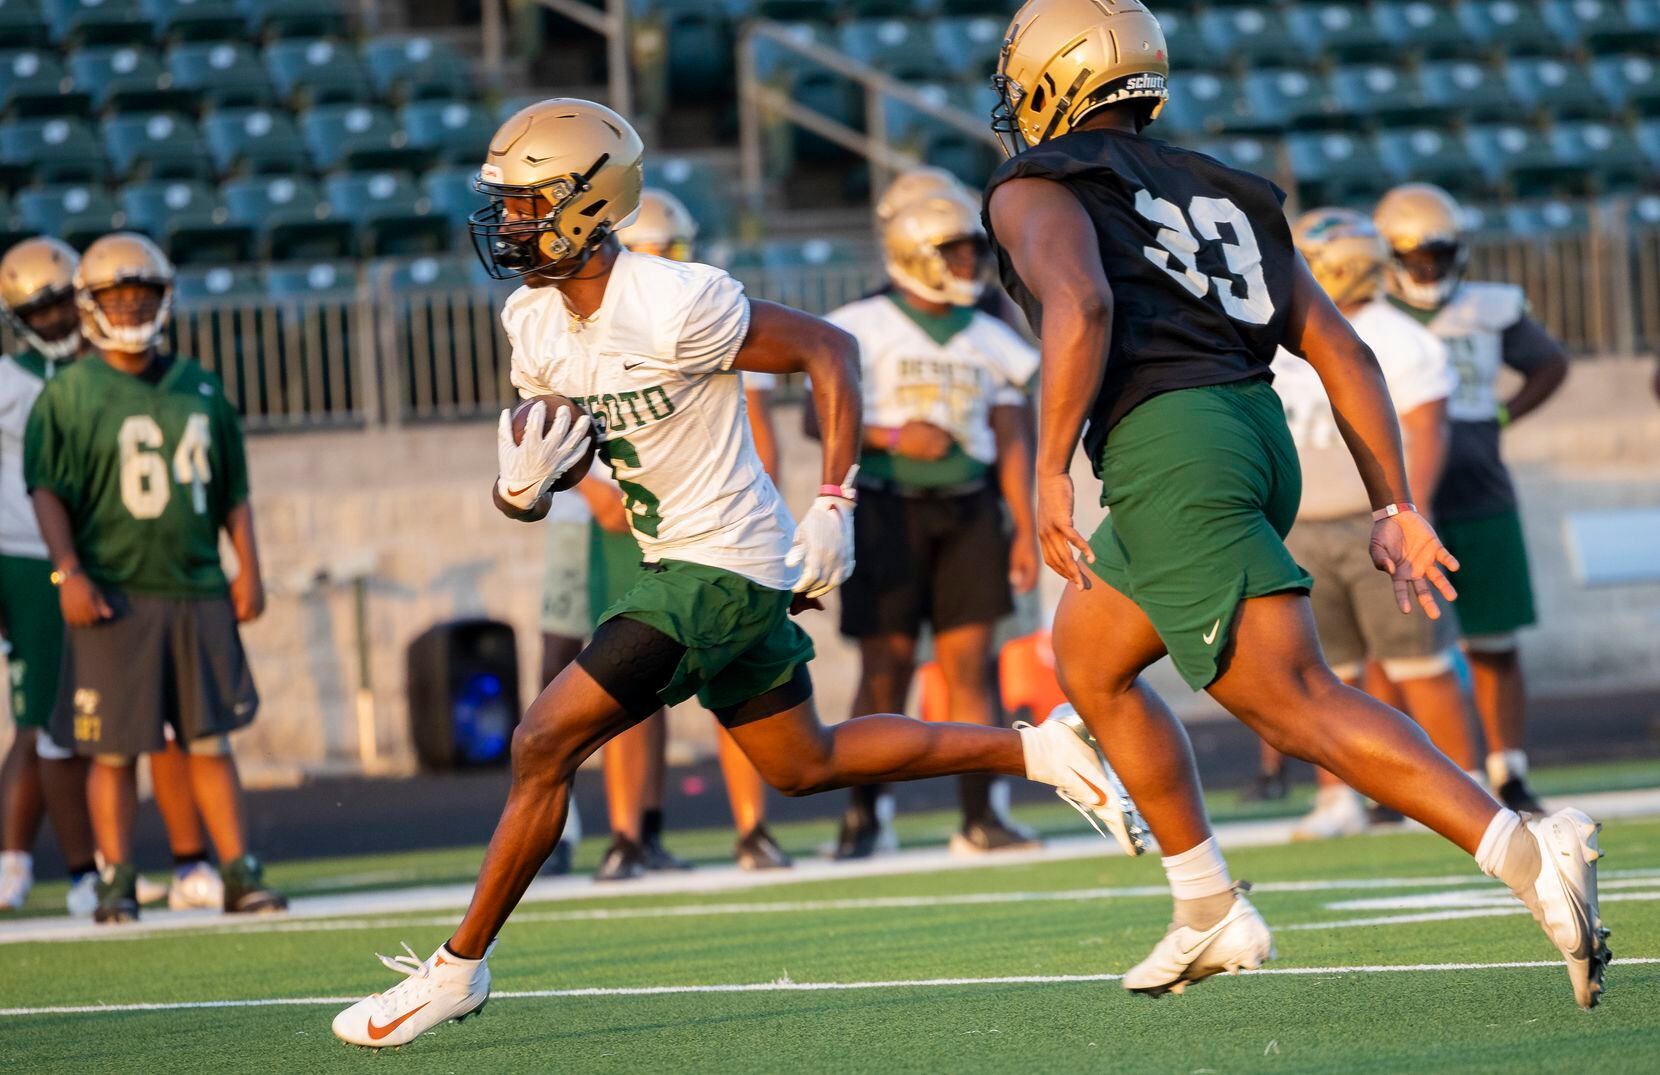 DeSoto running back Tre Wisner runs the ball during a play with his team during the first...